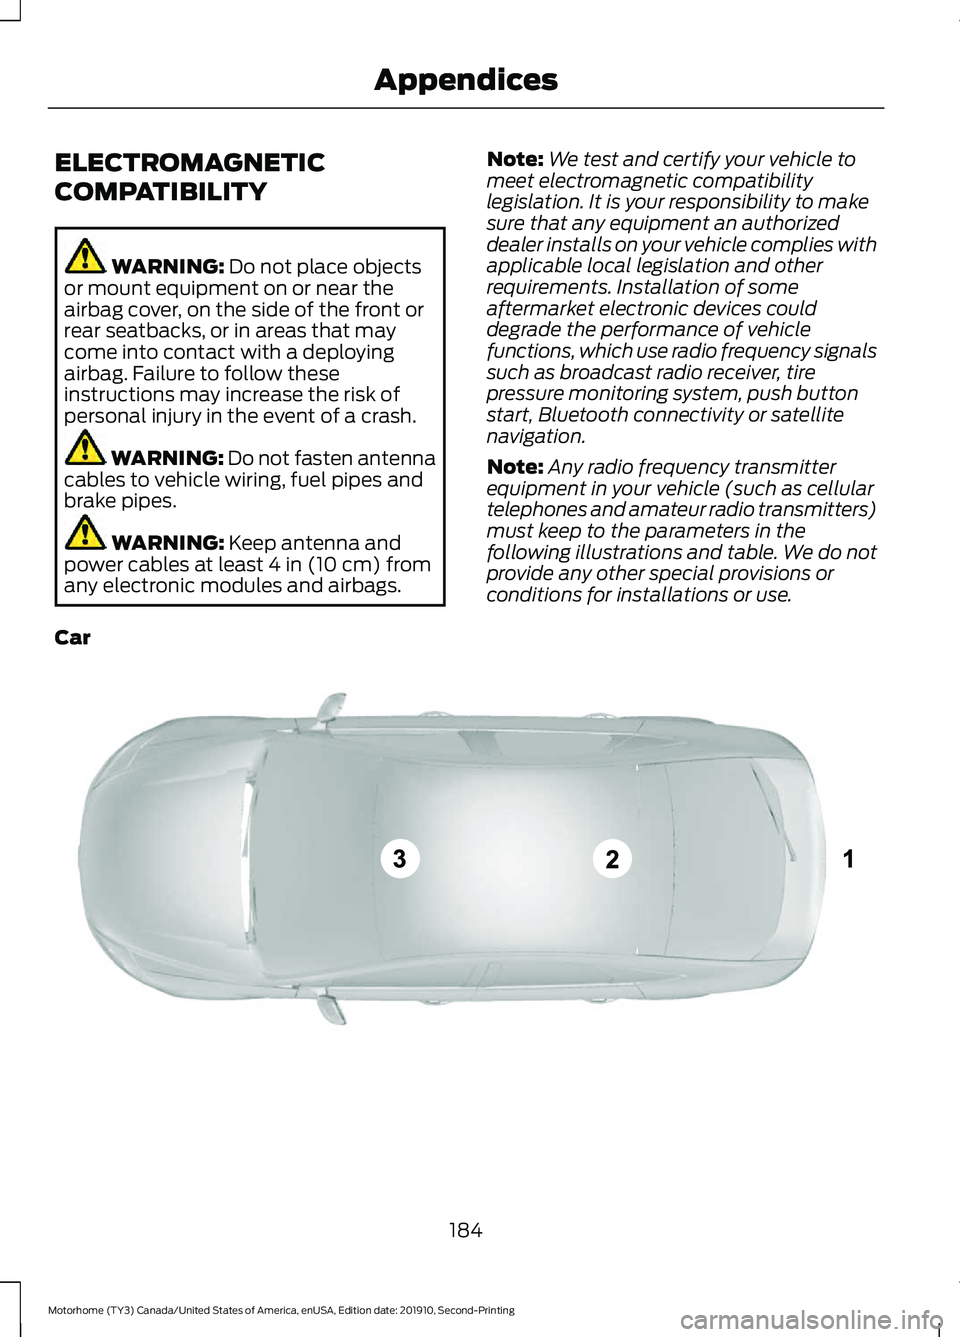 FORD F-53 2020  Owners Manual ELECTROMAGNETIC
COMPATIBILITY
WARNING: Do not place objects
or mount equipment on or near the
airbag cover, on the side of the front or
rear seatbacks, or in areas that may
come into contact with a de